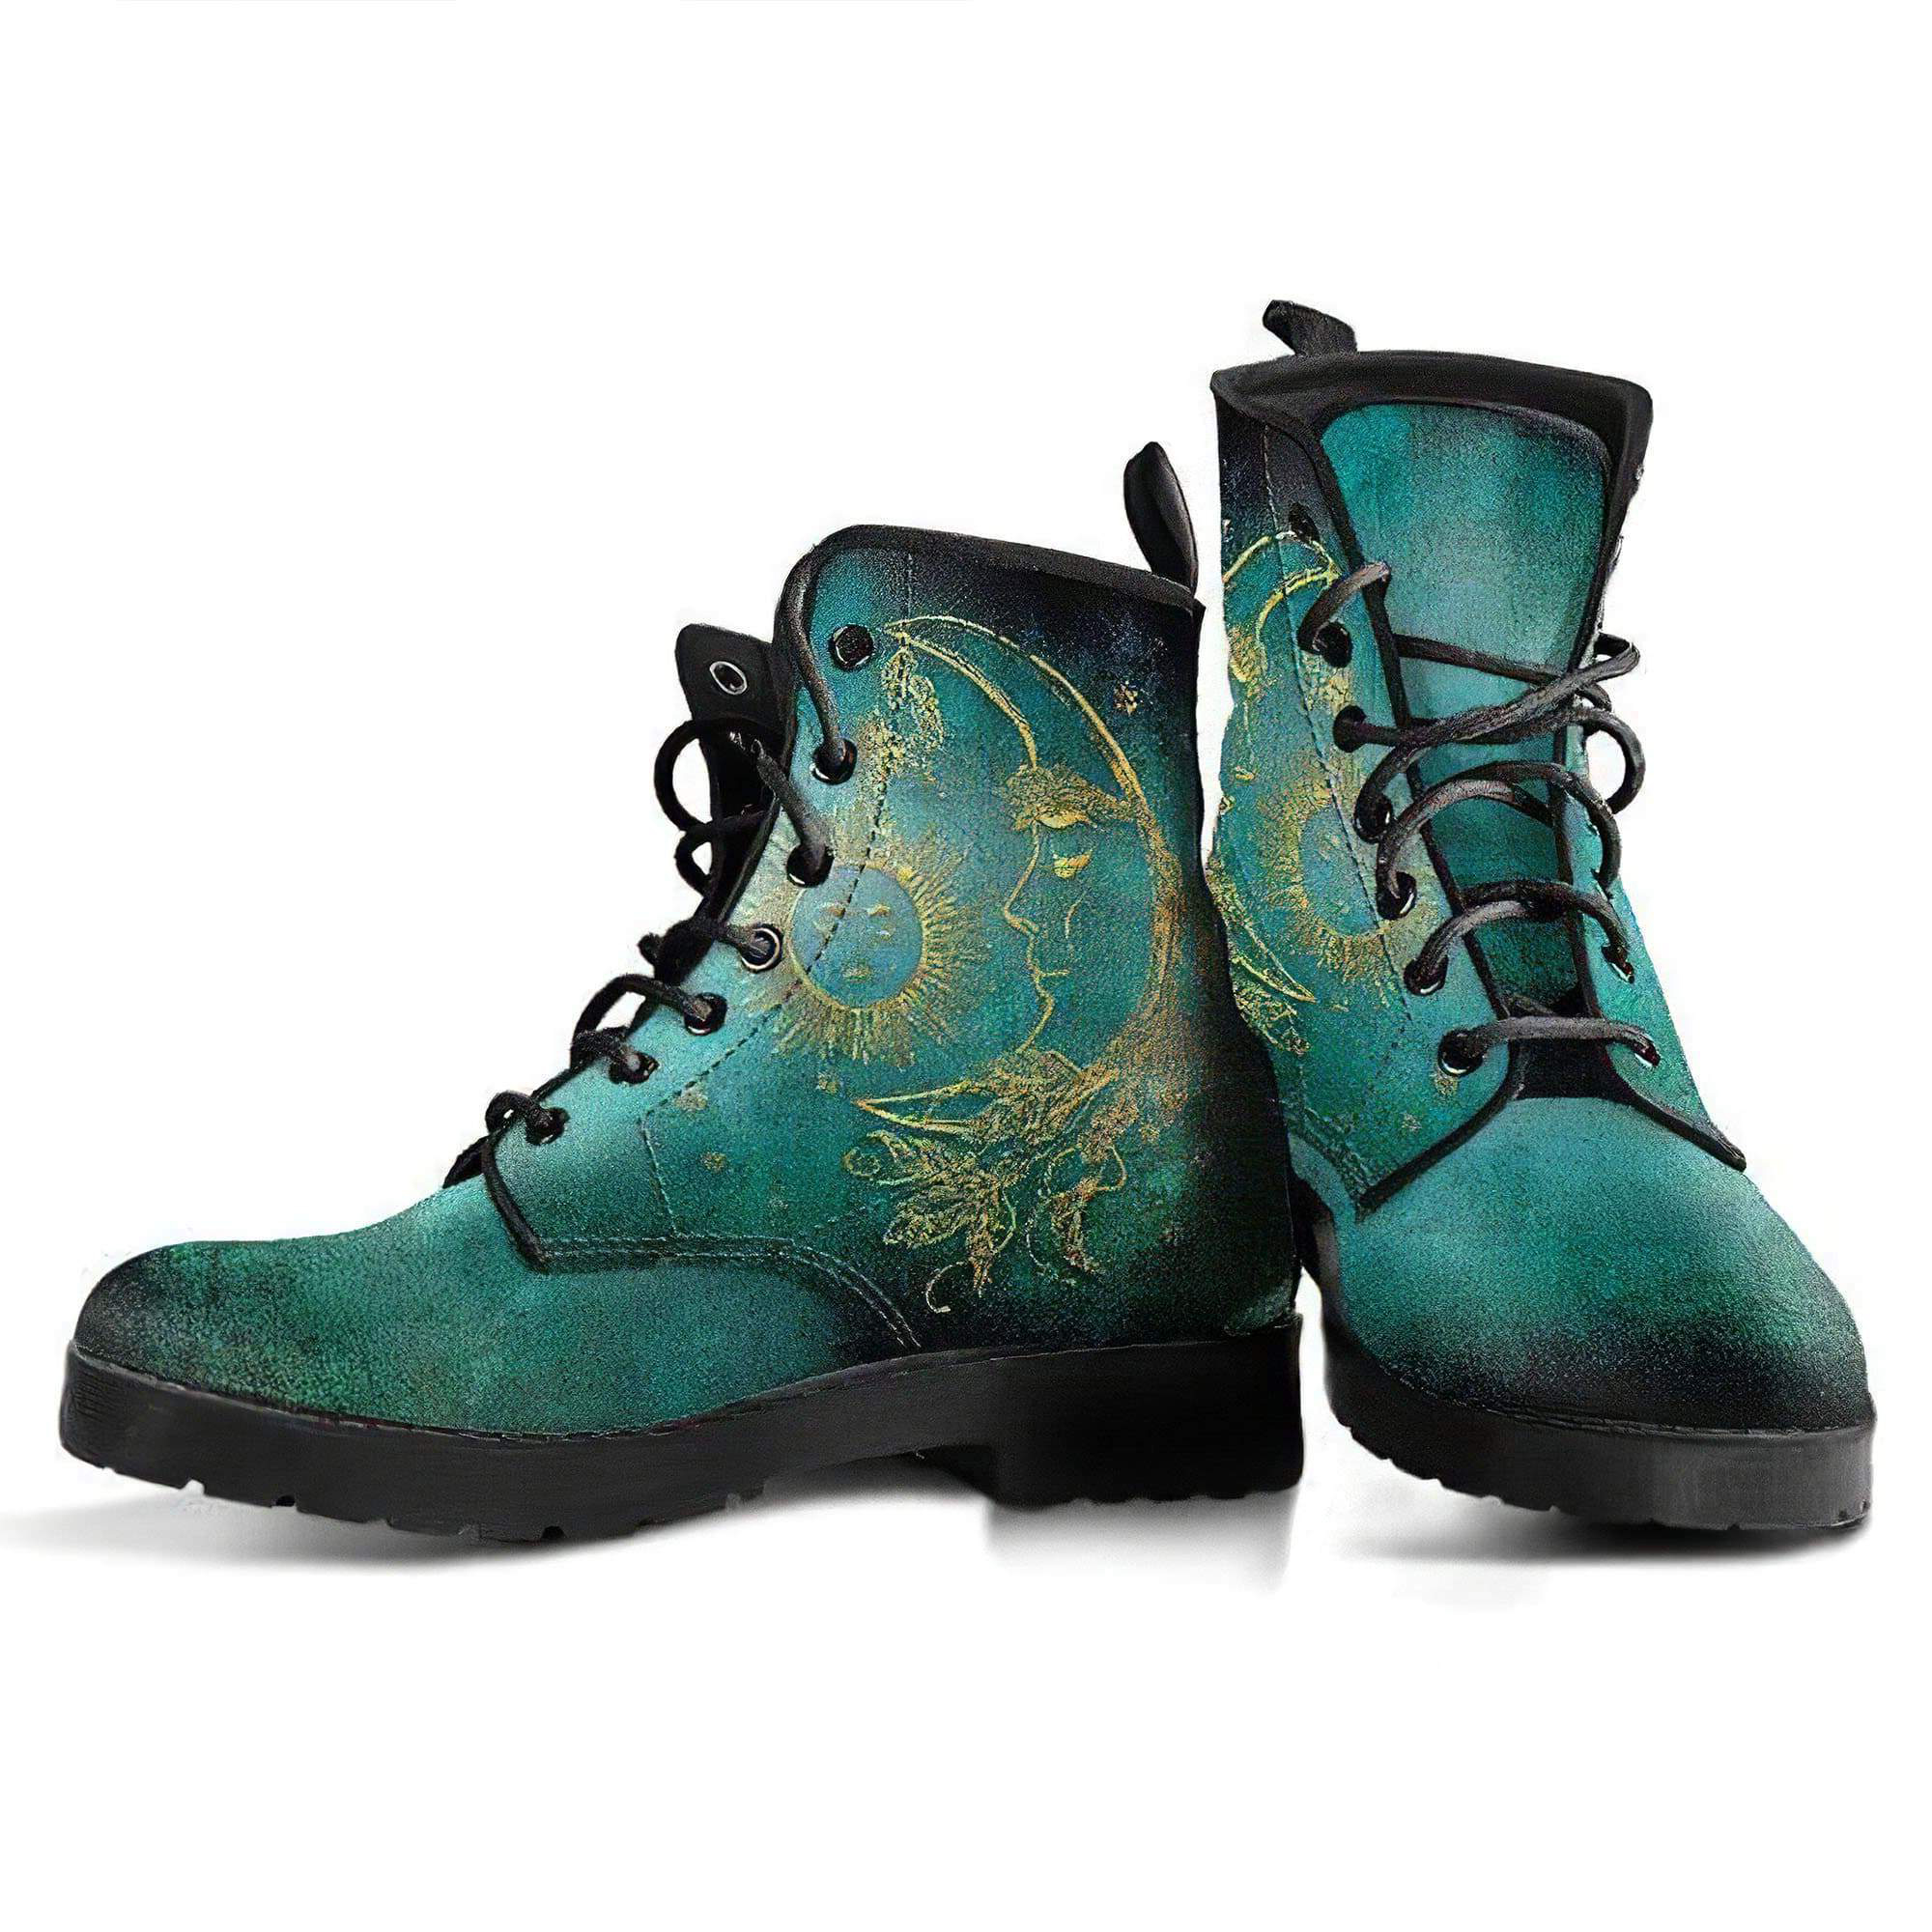 sun-moon-handcrafted-boots-women-s-leather-boots-12051961380925.jpg